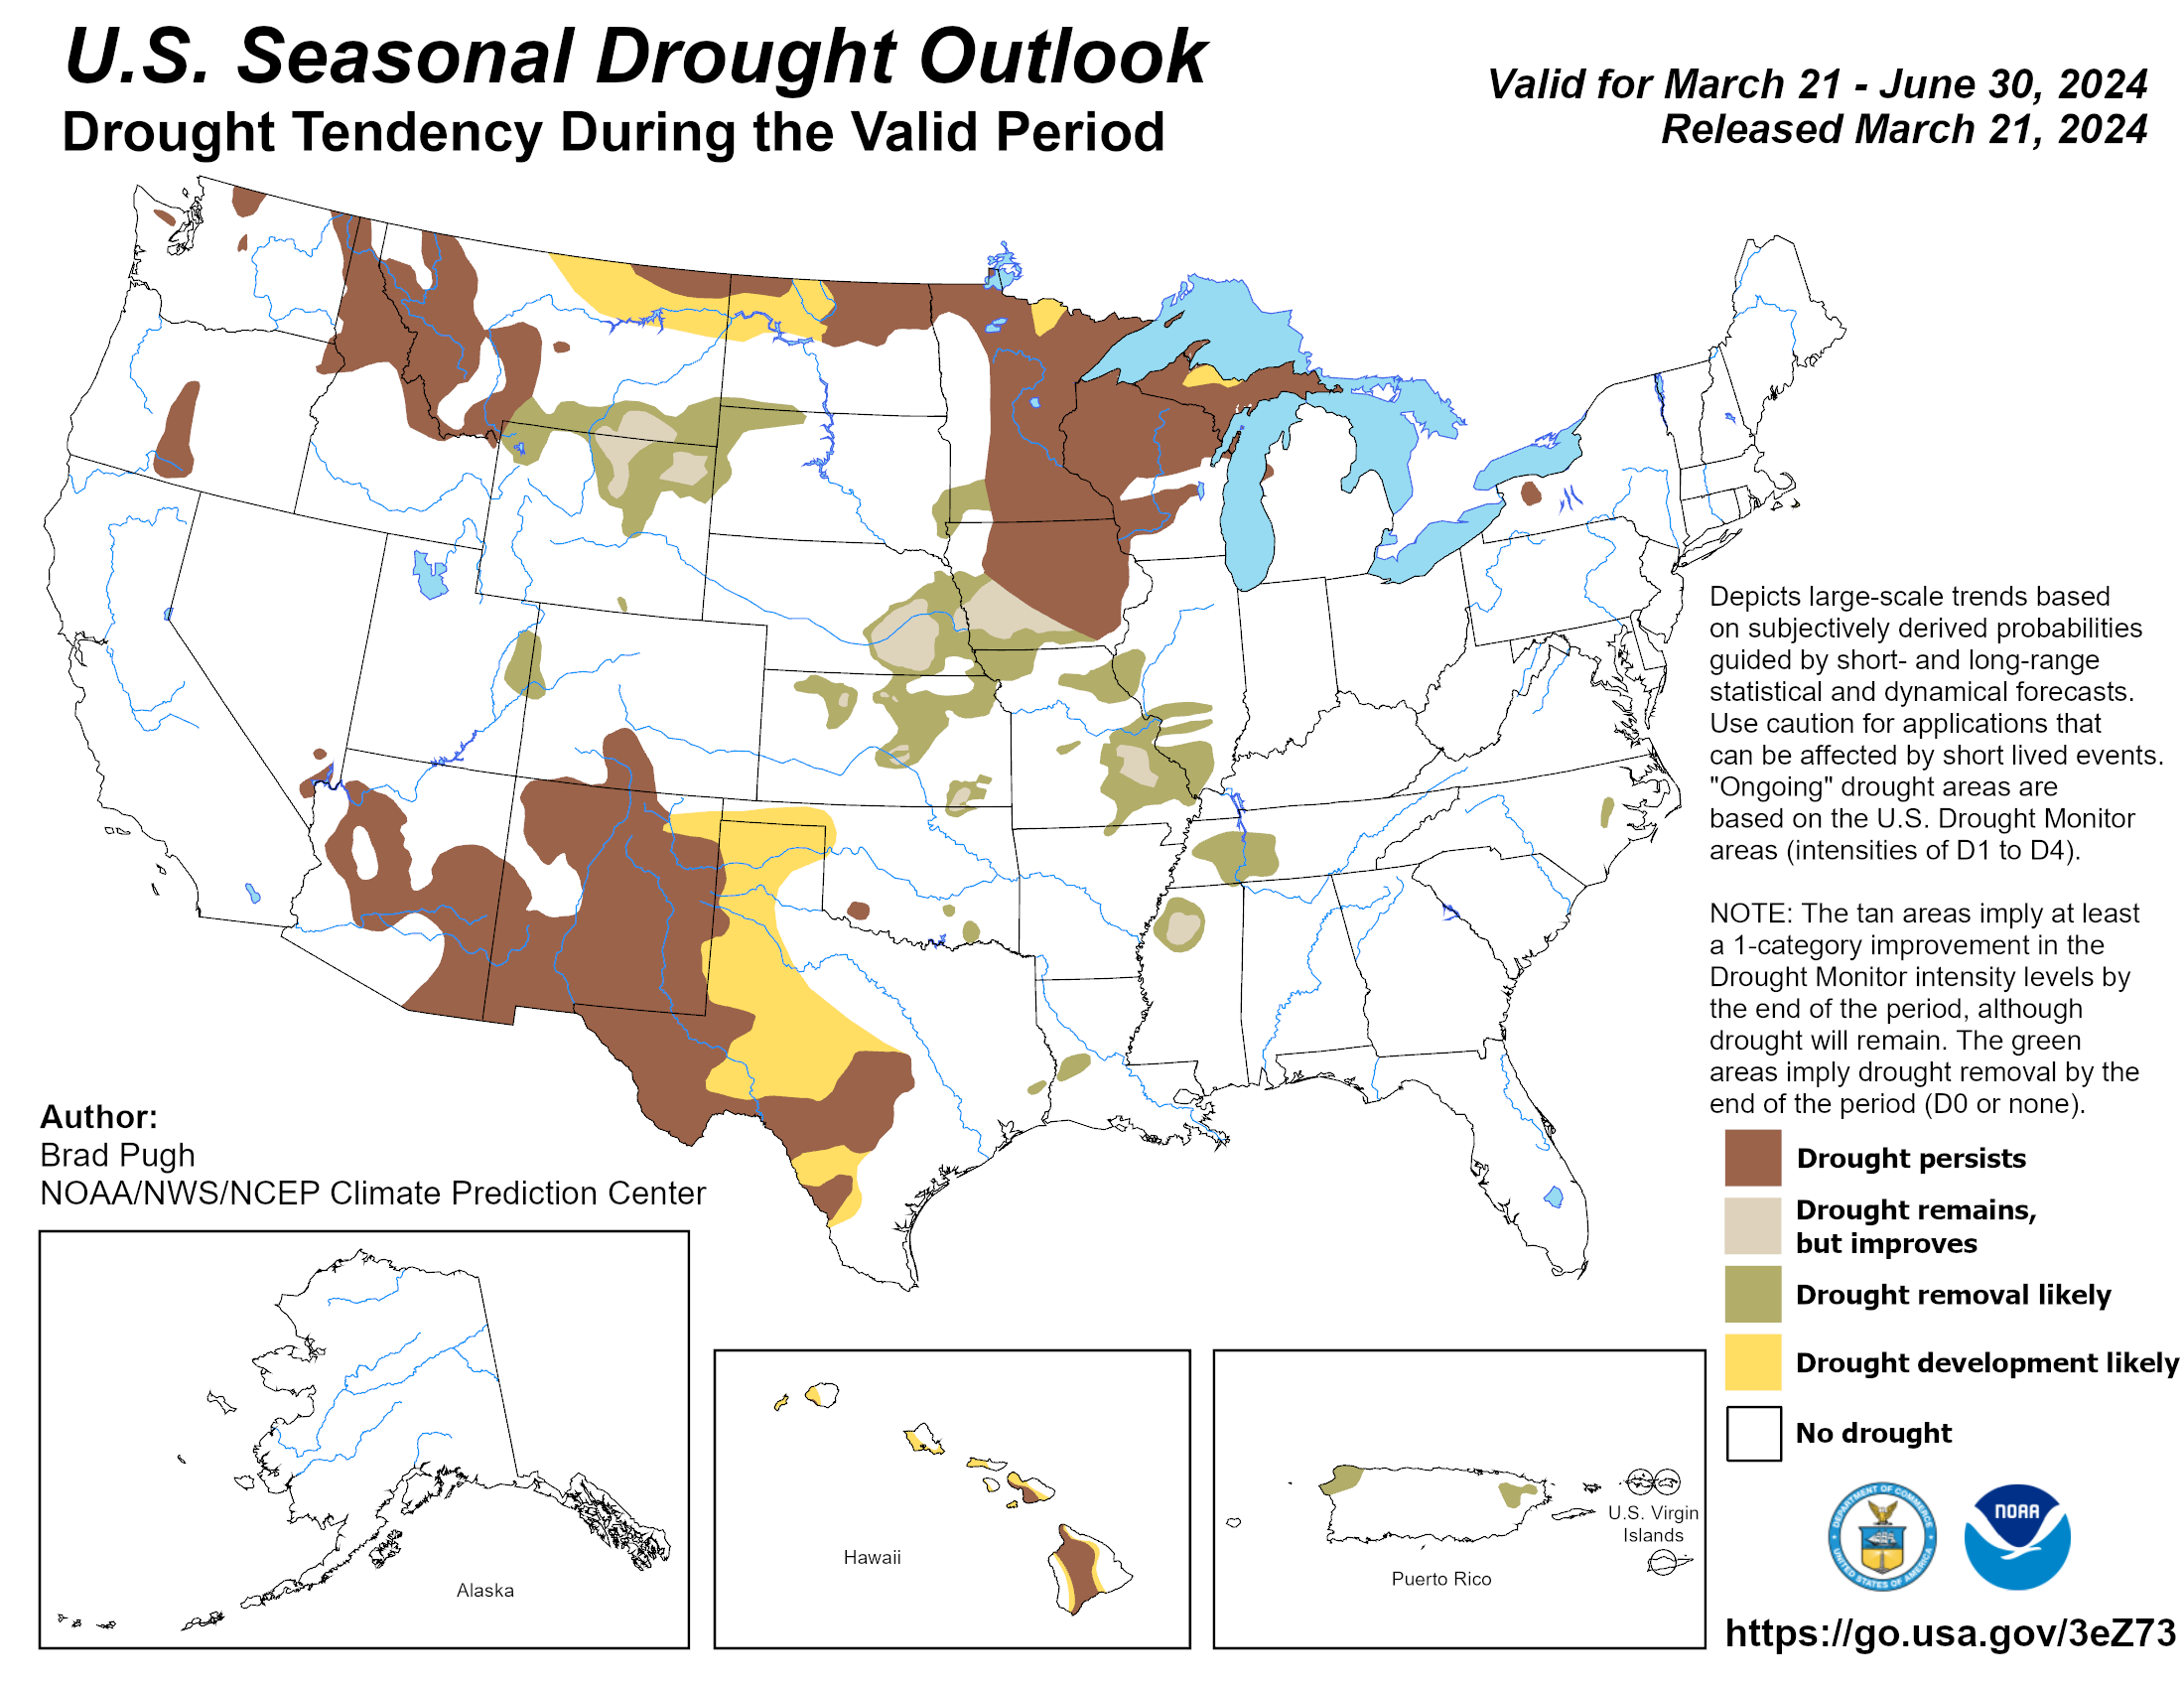 This map depicts where there is a greater than 50% chance of drought persistence, development or improvement based on short- and long-range statistical and dynamical forecasts from March 21 through June 30, 2024.